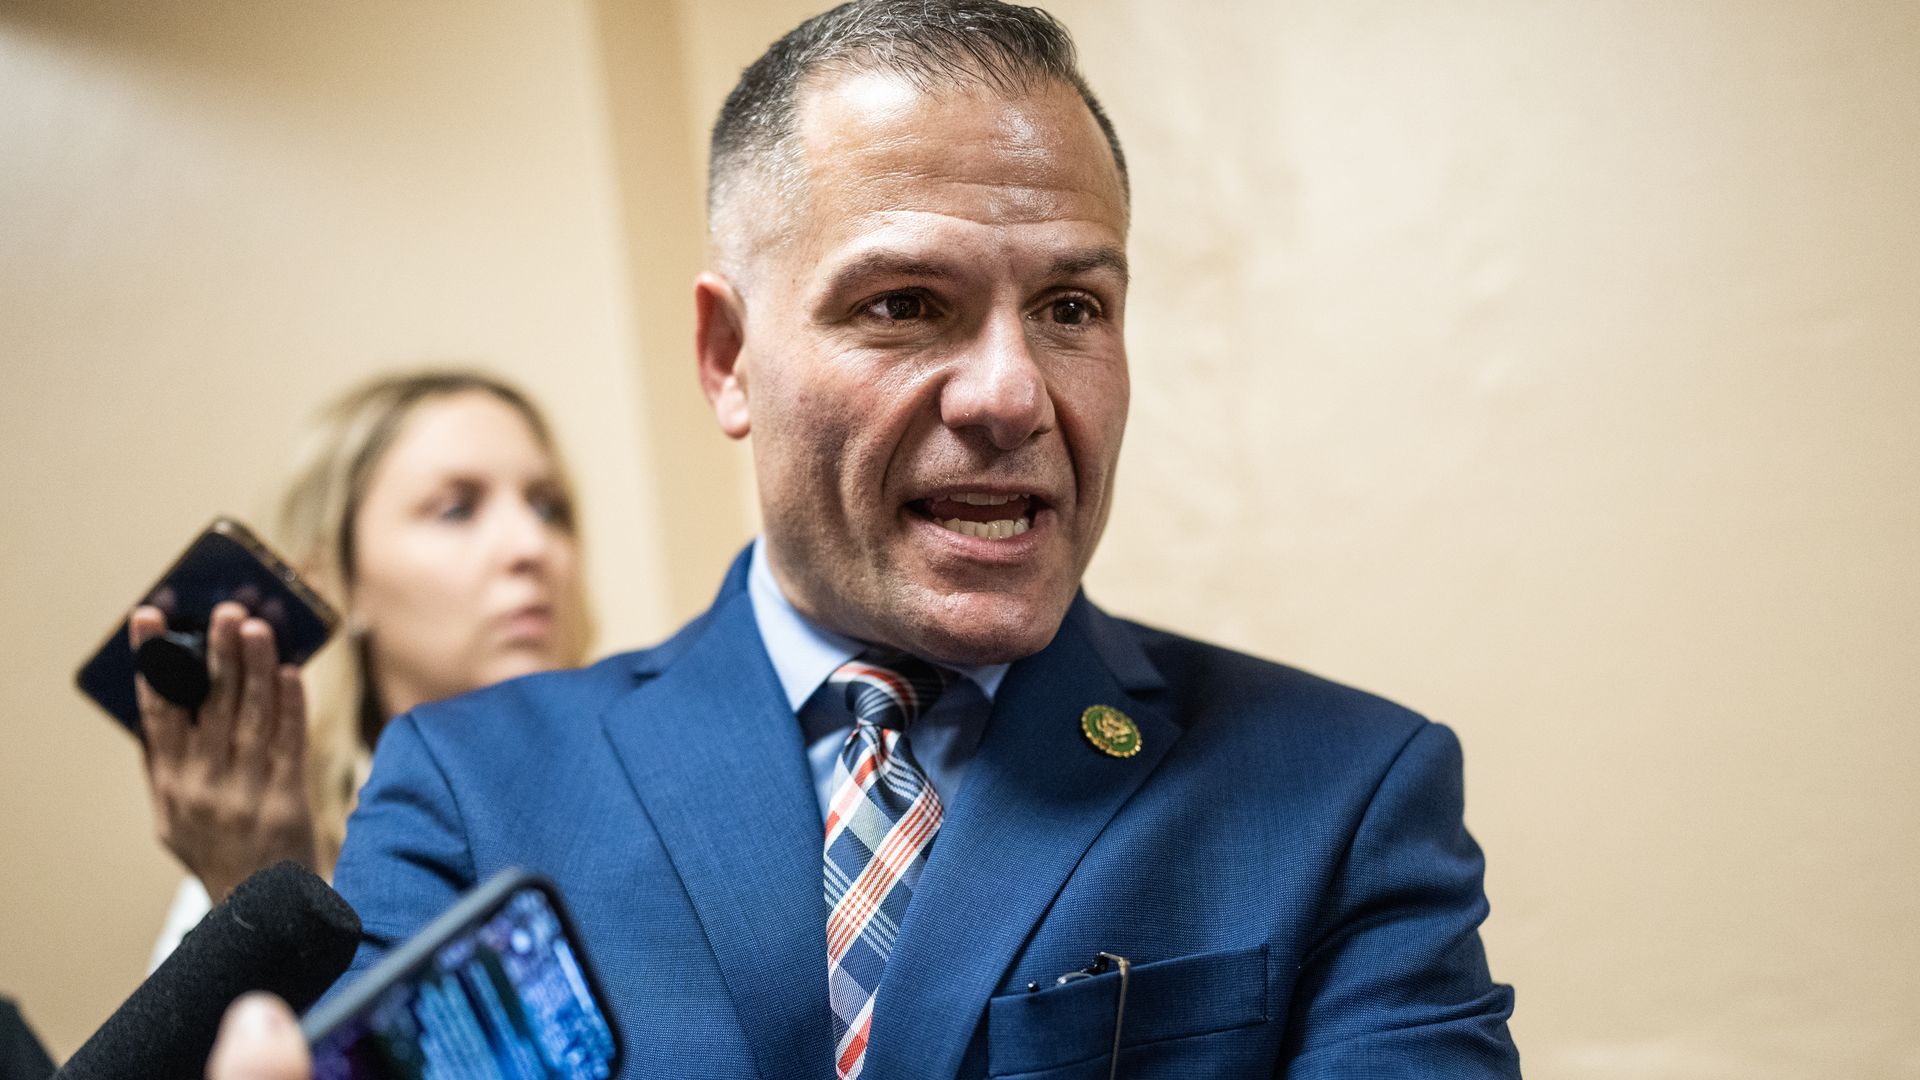 UNITED STATES - SEPTEMBER 27: Rep. Marc Molinaro, R-N.Y., talks with reporters after a meeting of the House Republican Conference in the U.S. Capitol on Wednesday, September 27, 2023. (Tom Williams/CQ-Roll Call, Inc via Getty Images)